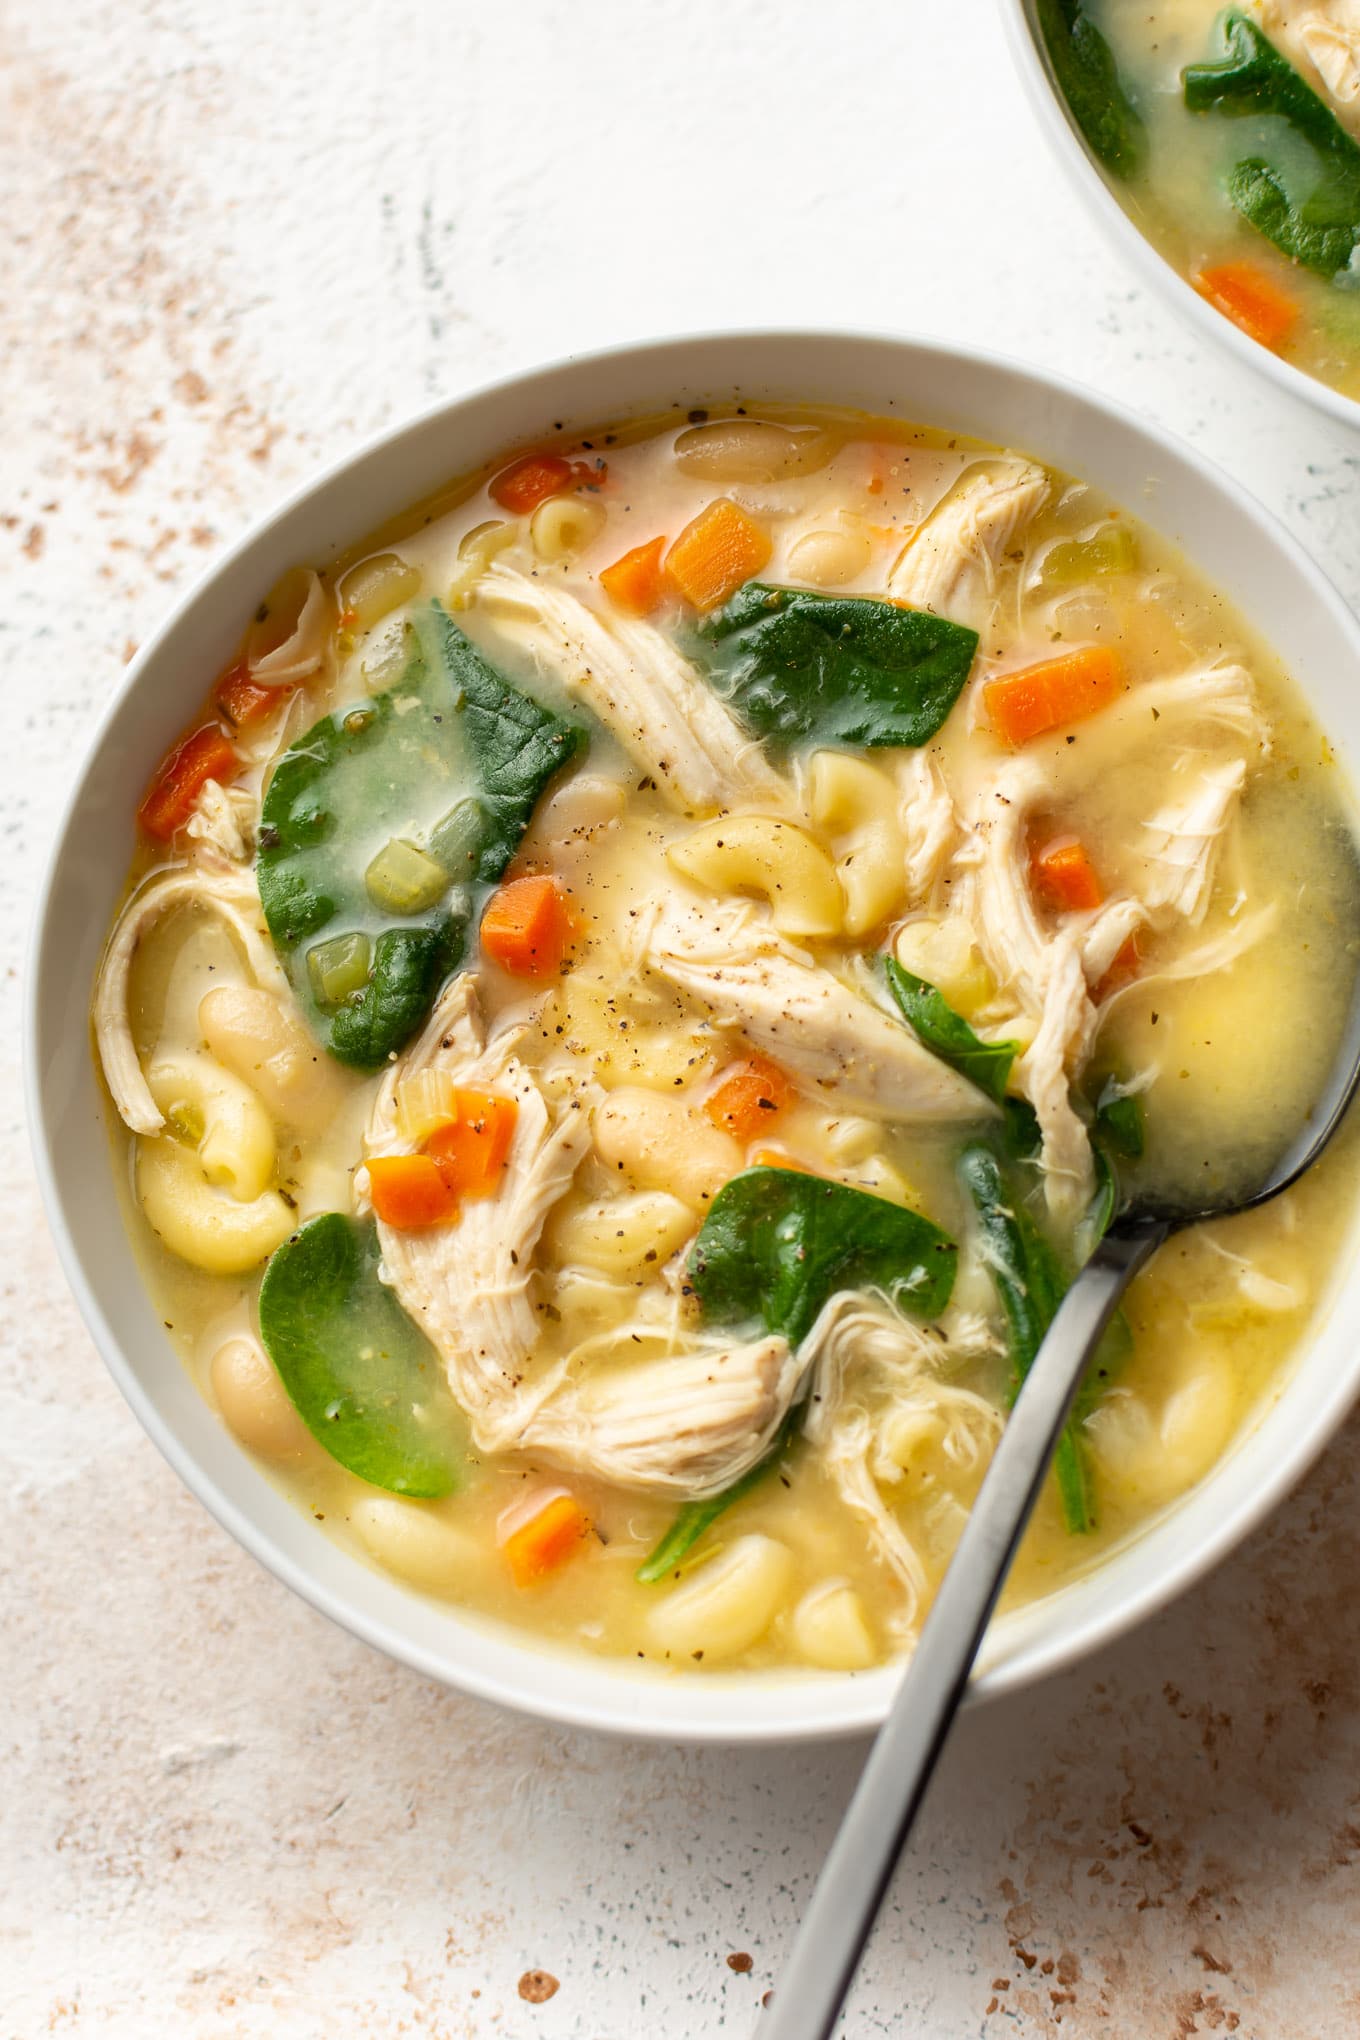 It has pasta, veggies, beans, and tender chicken in a tasty lemony broth. 